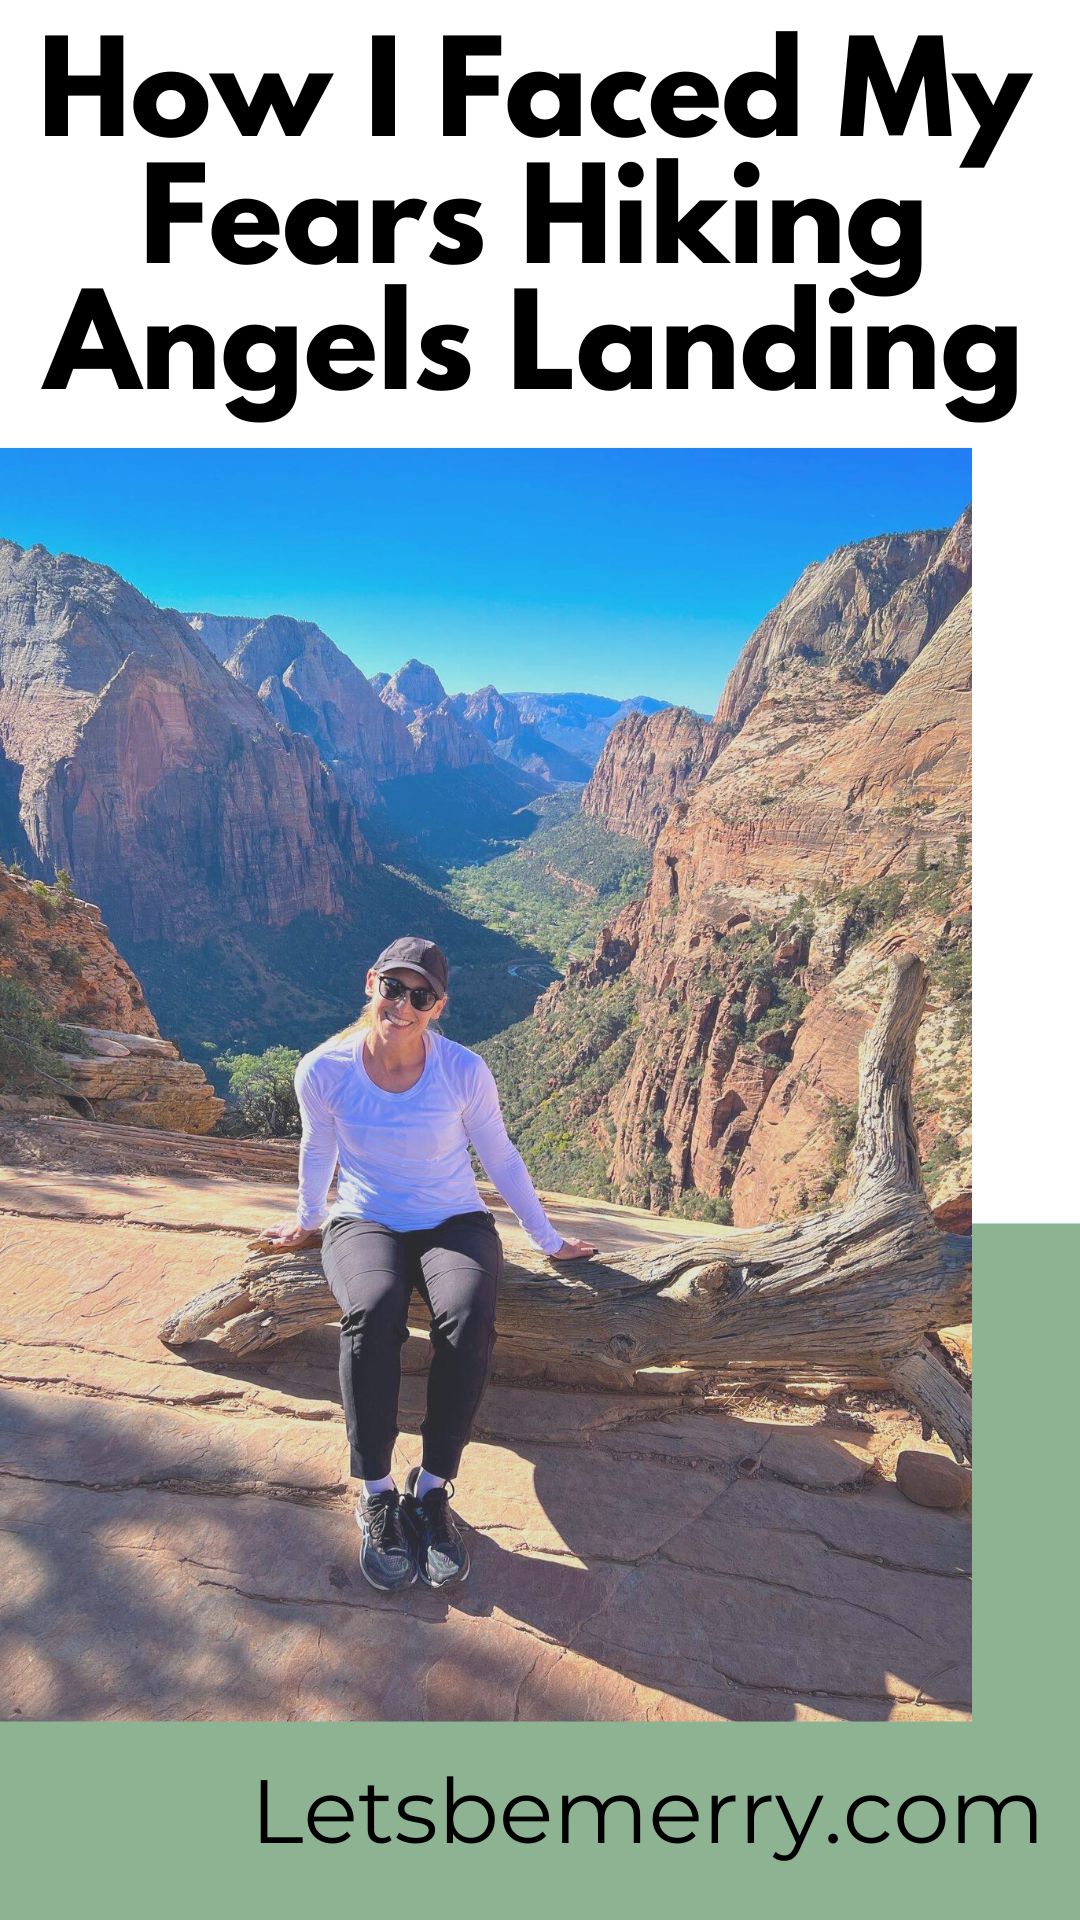 How I Faced My Fears Hiking Angels Landing, One of the Most Dangerous Trails in America